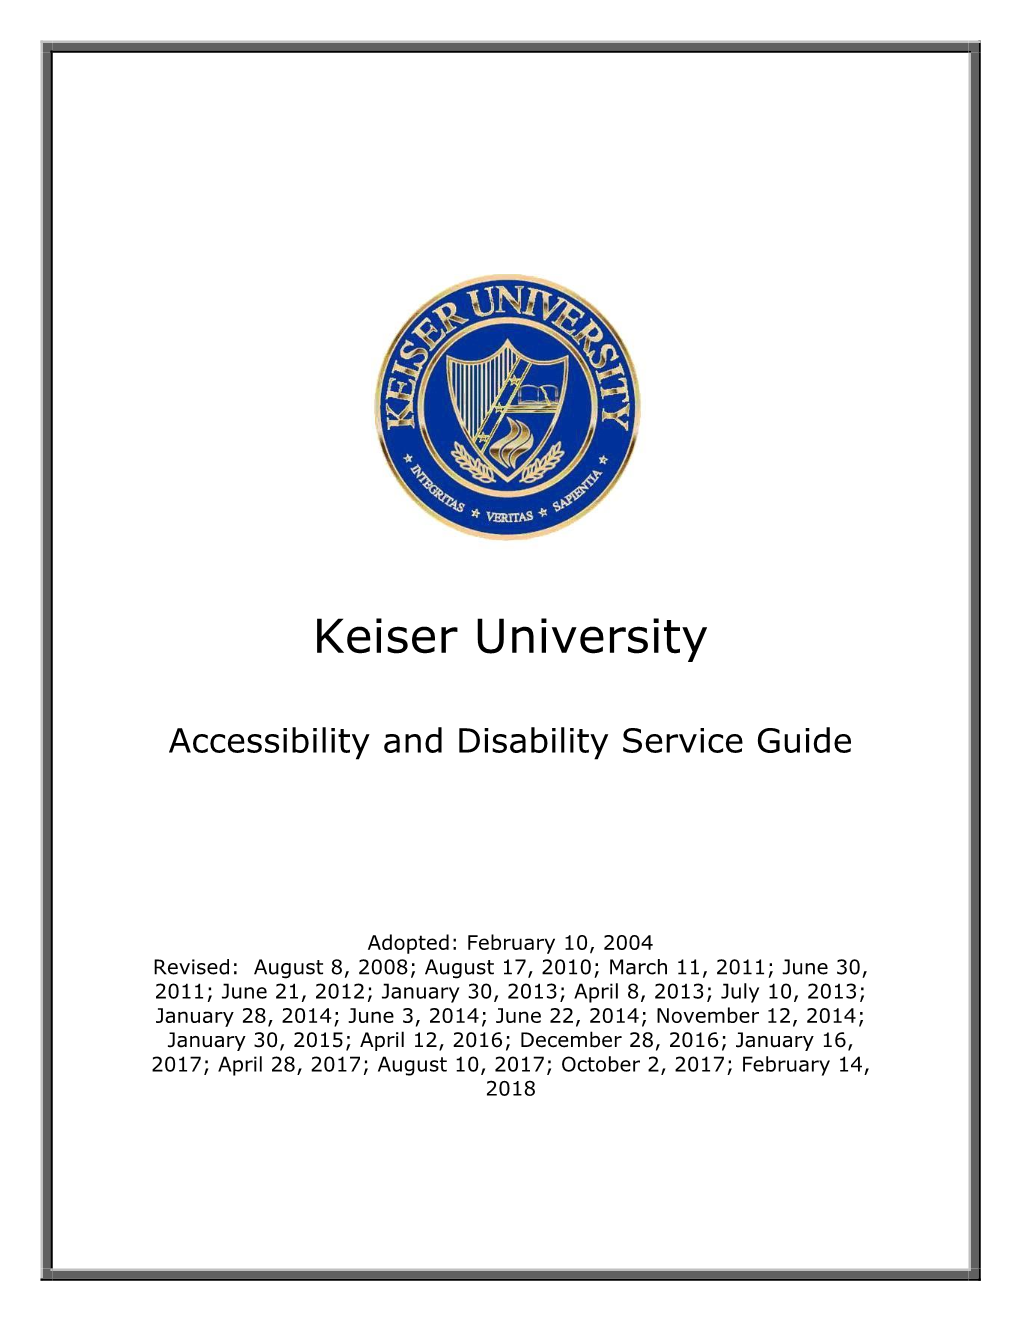 Accessibility and Disability Service Guide